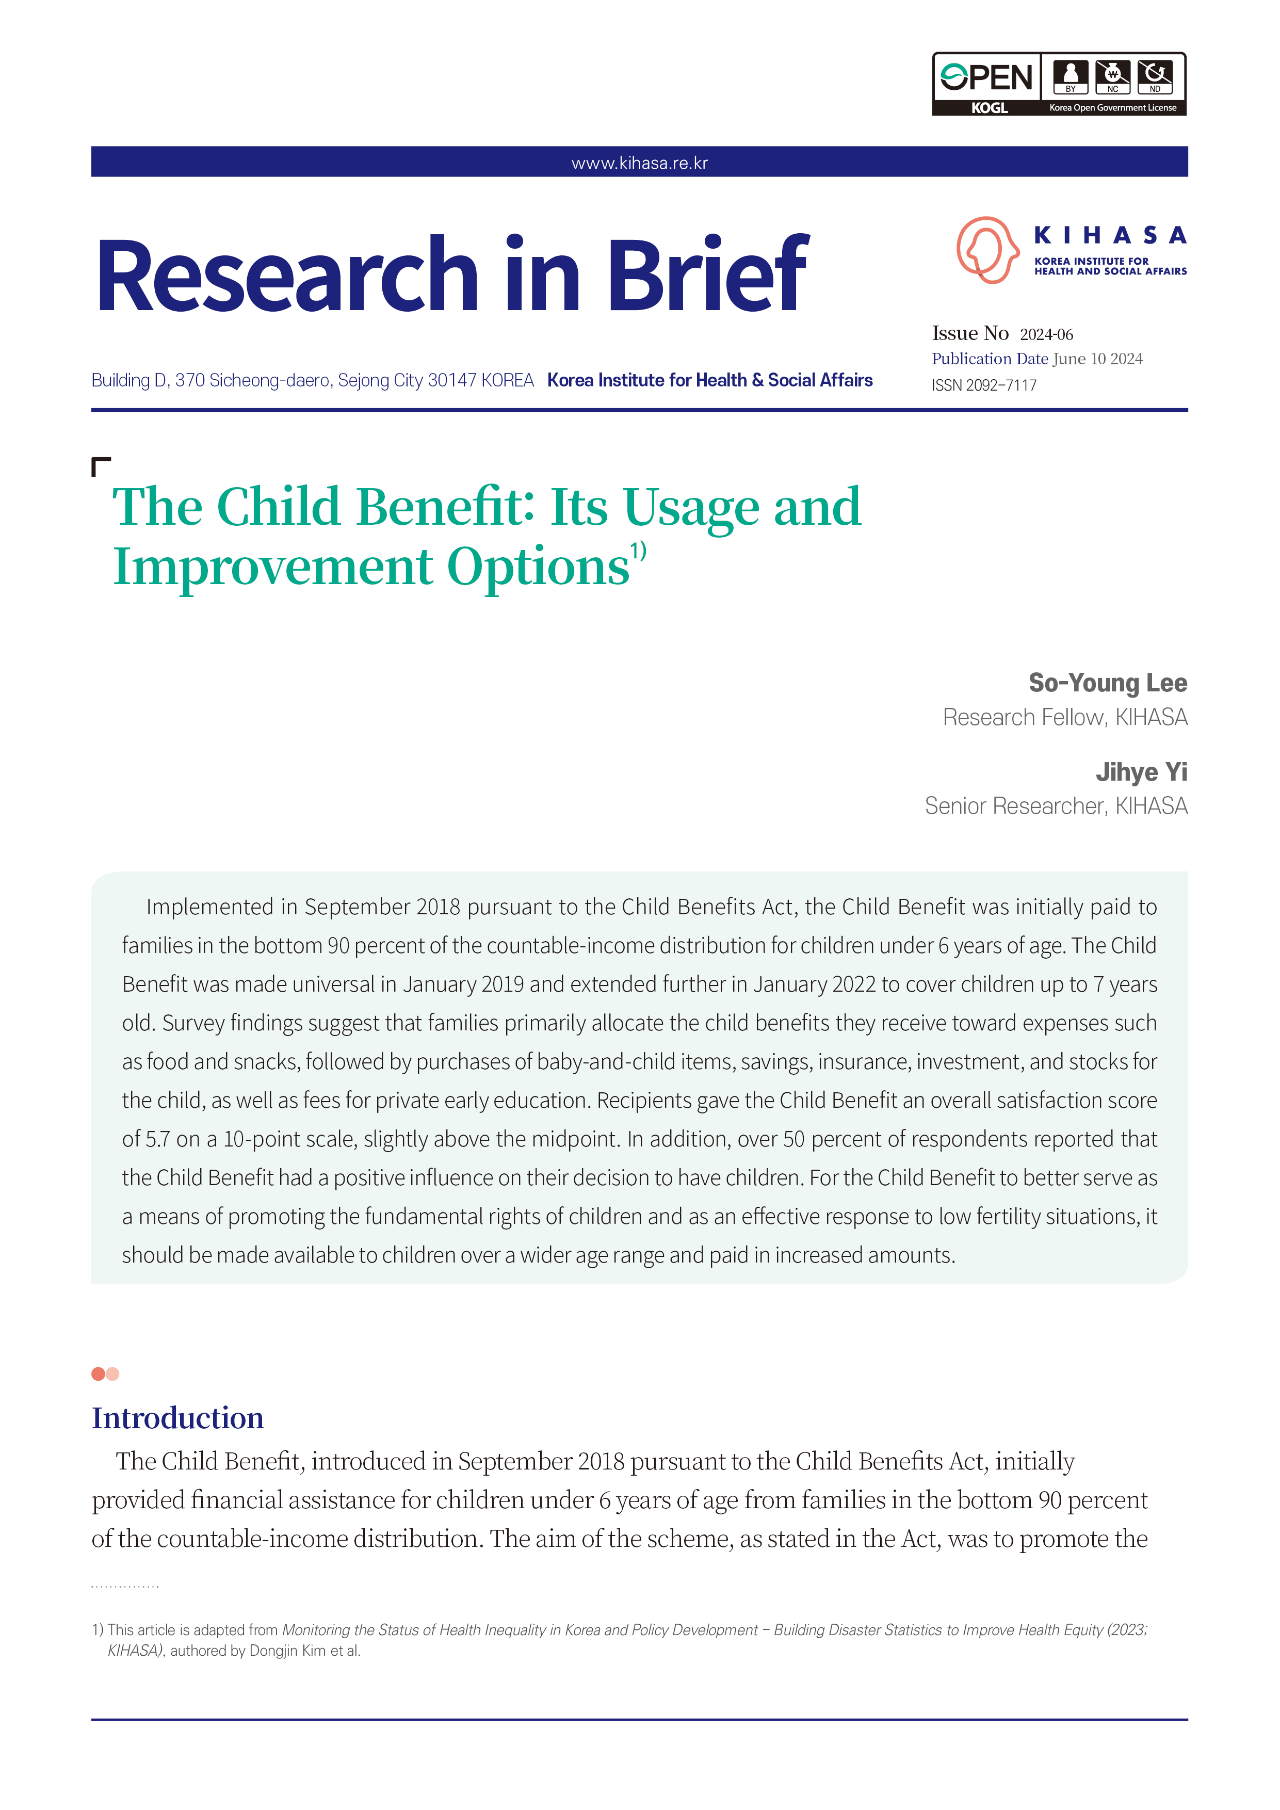 The Child Benefit: Its Usage and Improvement Options